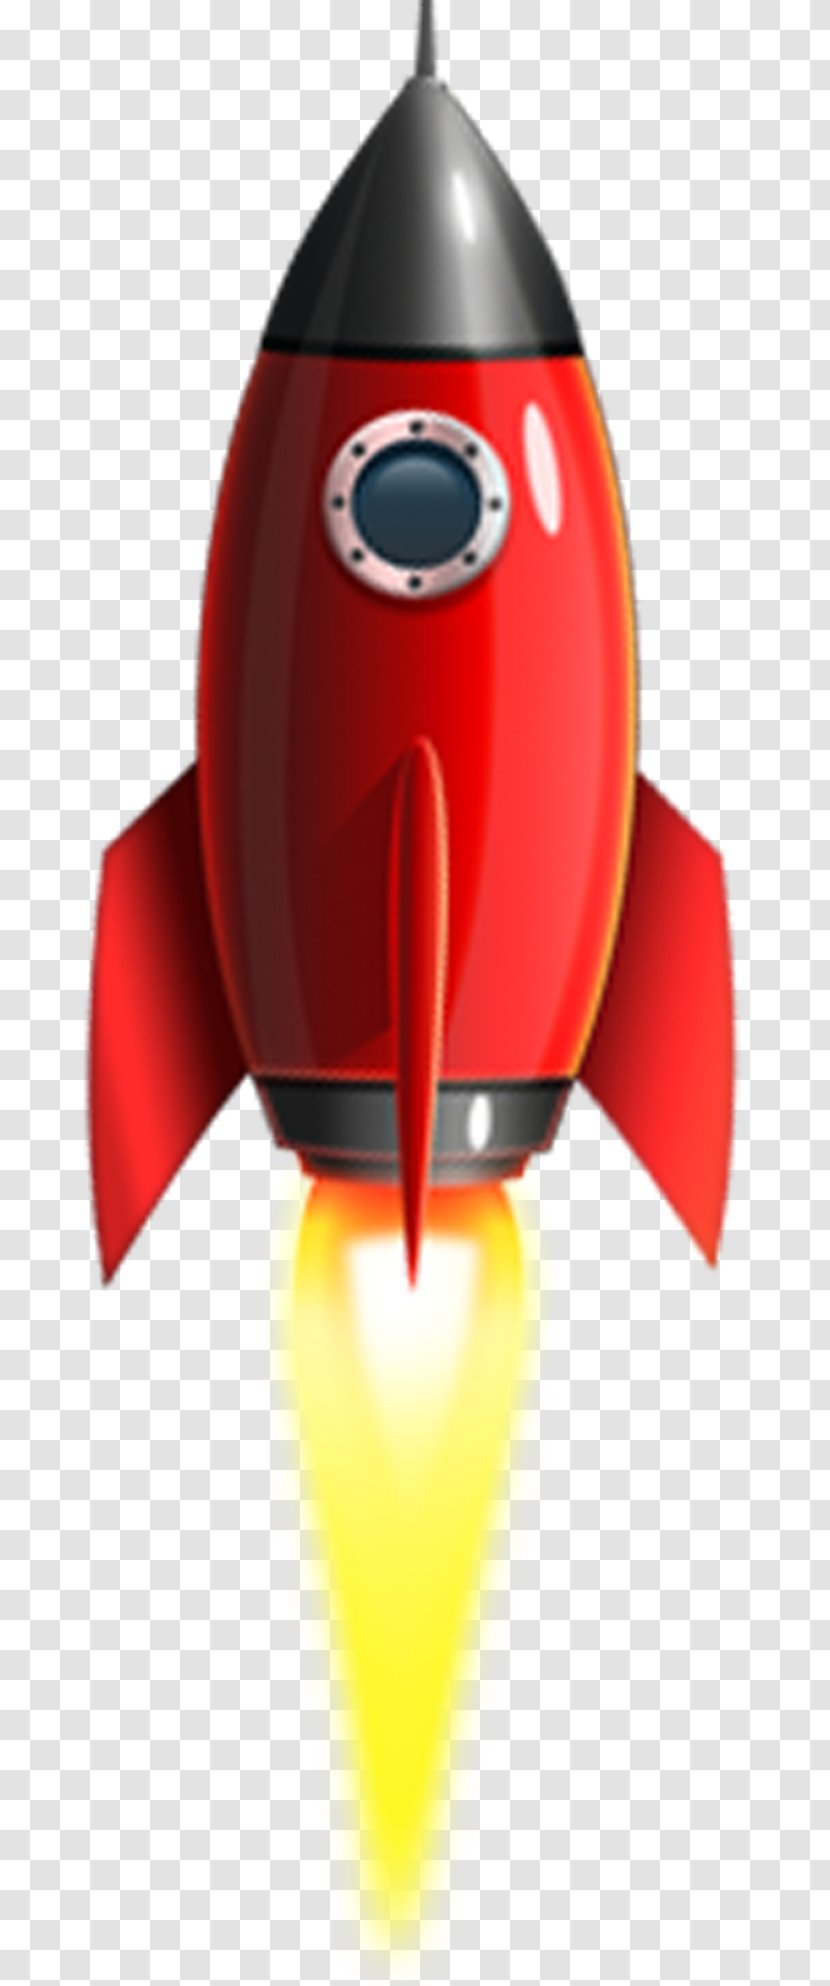 Rocket Launch - Spacecraft - Space Craft Transparent PNG